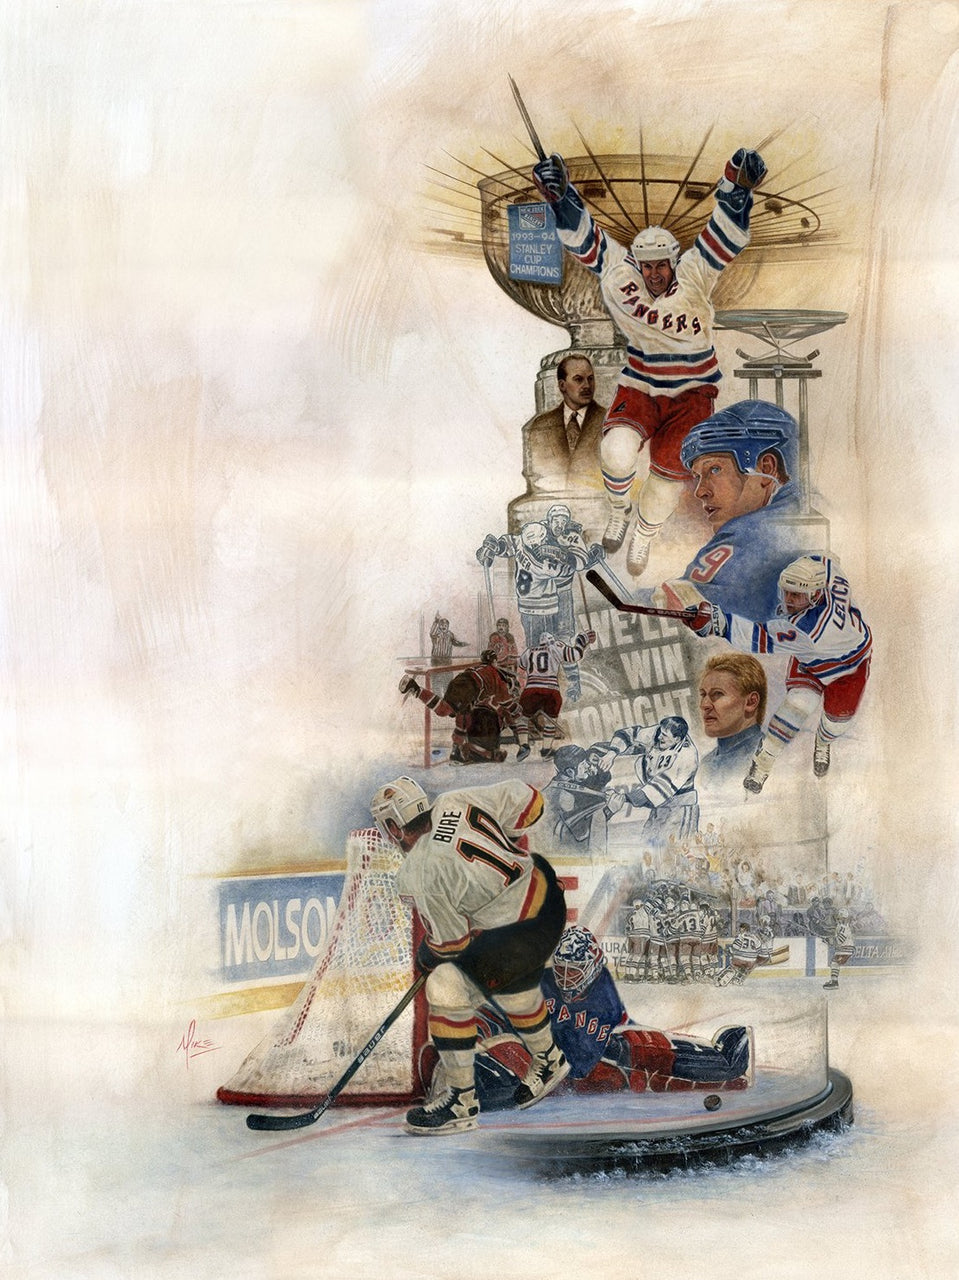 "Heave Ho" - A Tribute to the 1994 NY Rangers Stanley Cup Team